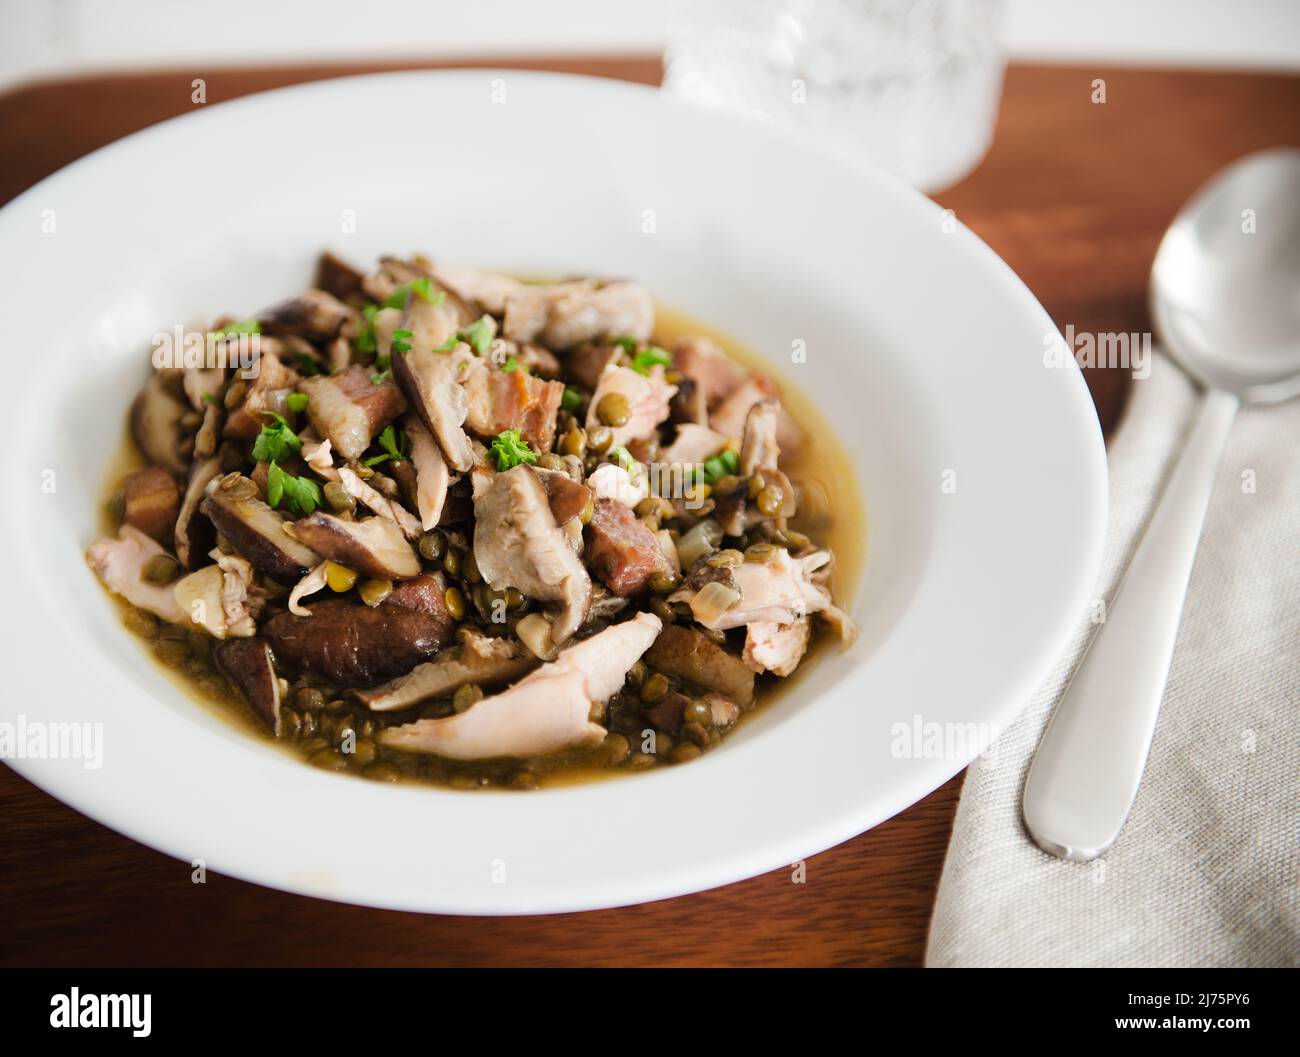 A Bowl of Chicken, Lentil and Mushroom Soup Stock Photo